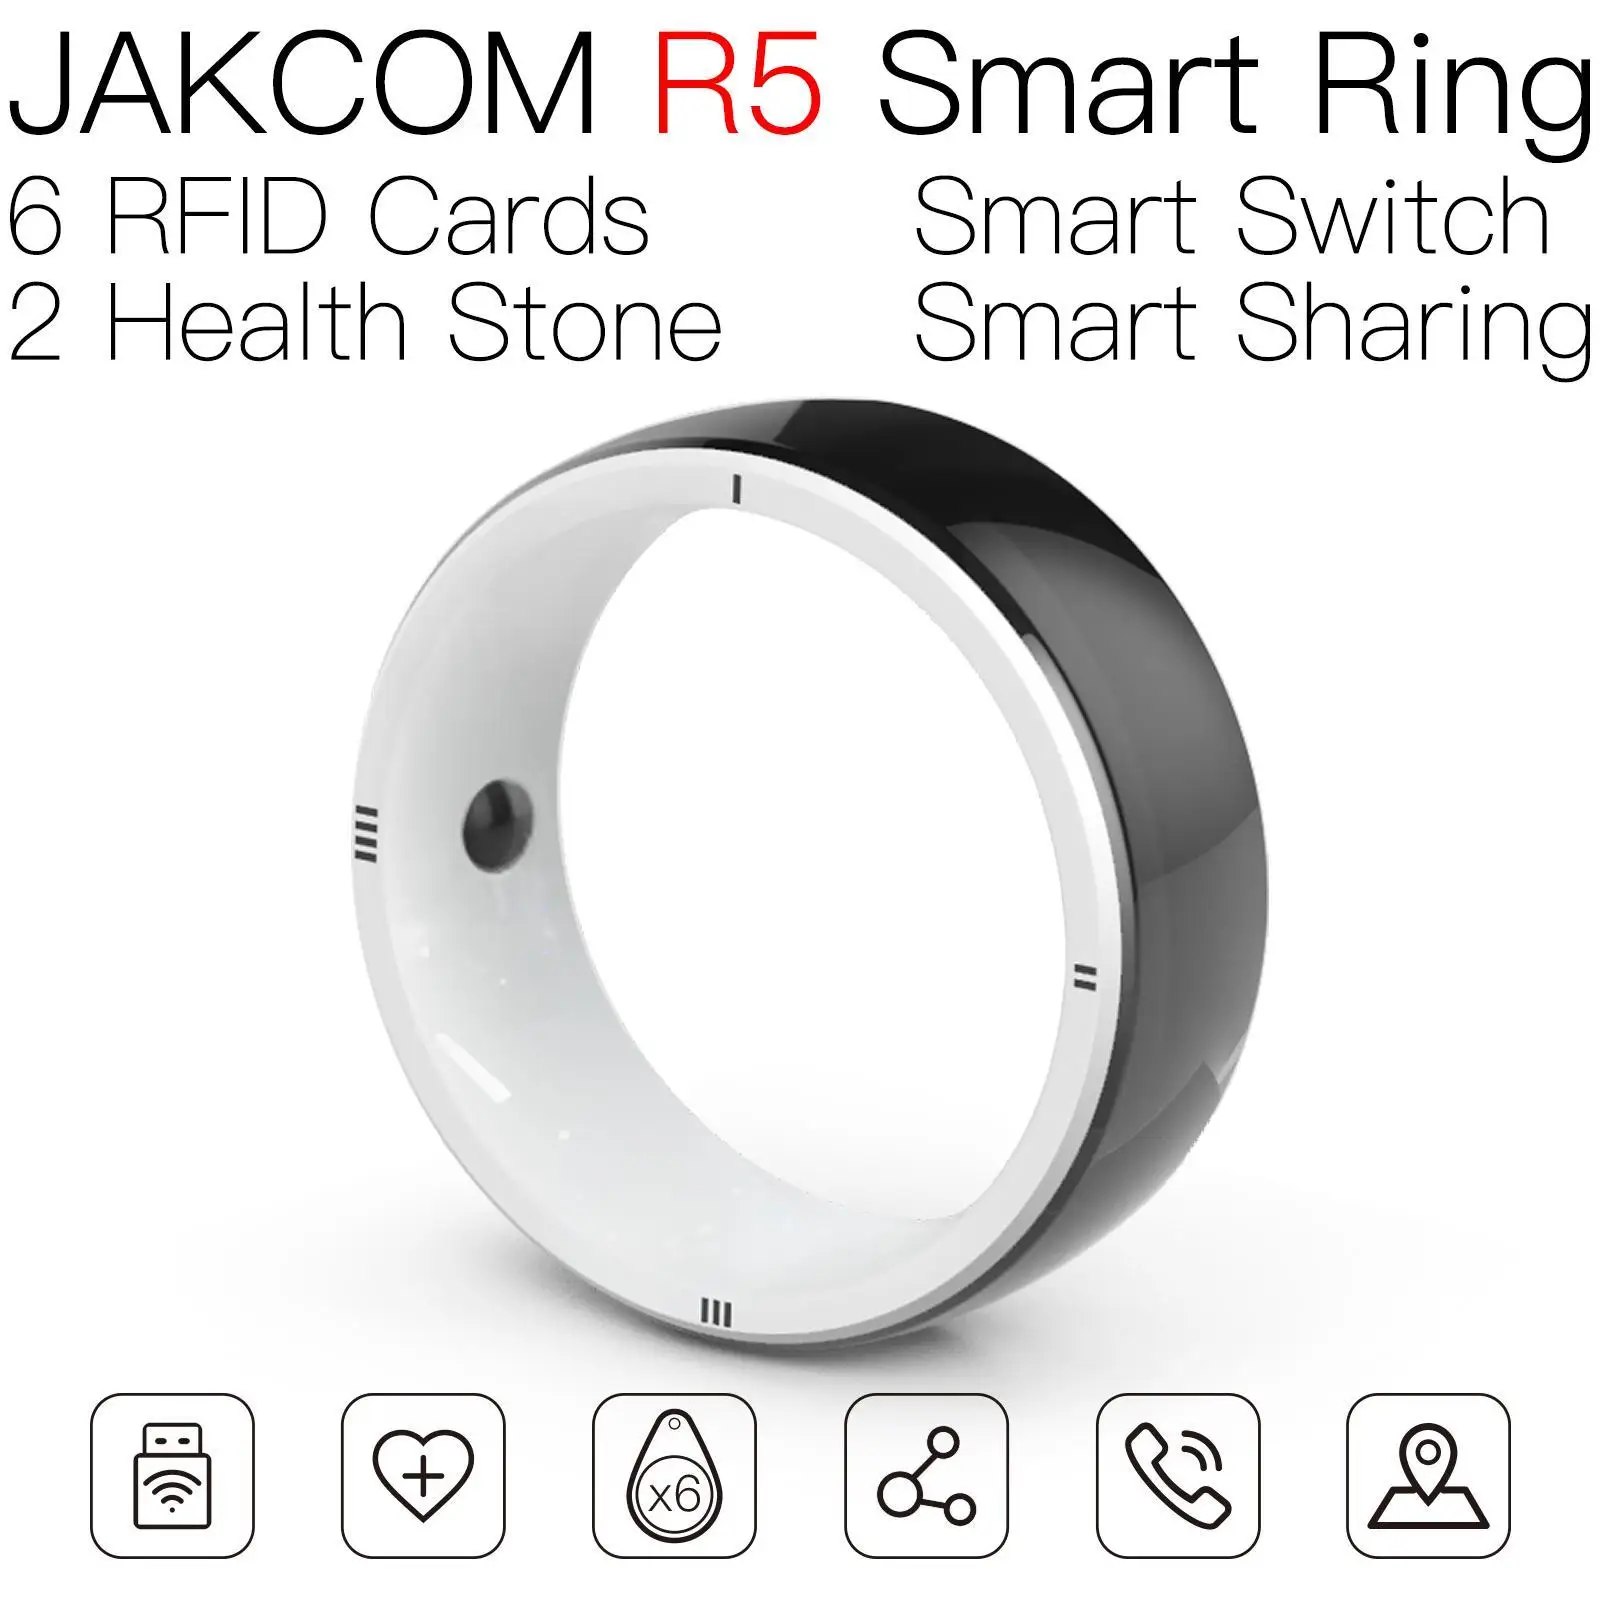 

JAKCOM R5 Smart Ring Match to id tag beer filling with pressure and hose uid 7 byte 2nd gen long range rfid card clothing ic